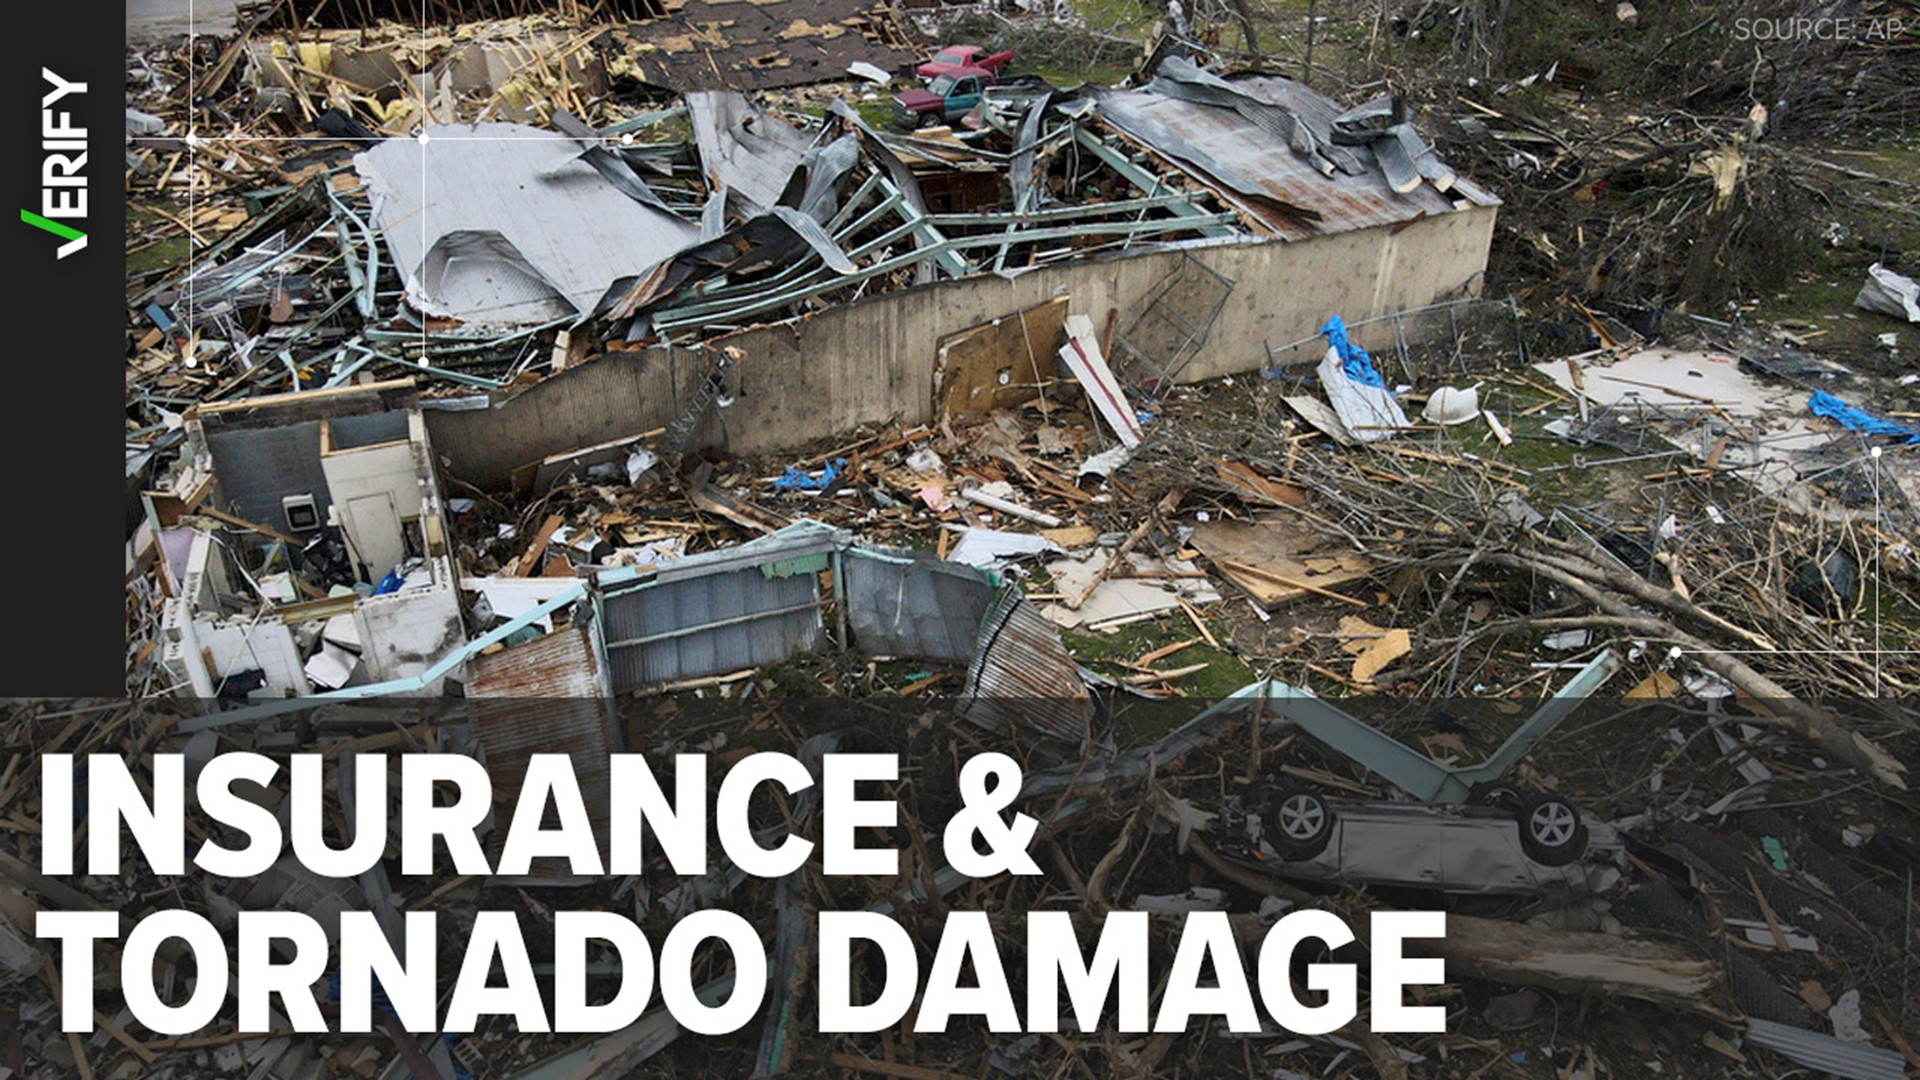 Some standard homeowners insurance policies cover tornado damage, but you may need to purchase additional windstorm coverage if you live in a storm-prone area.